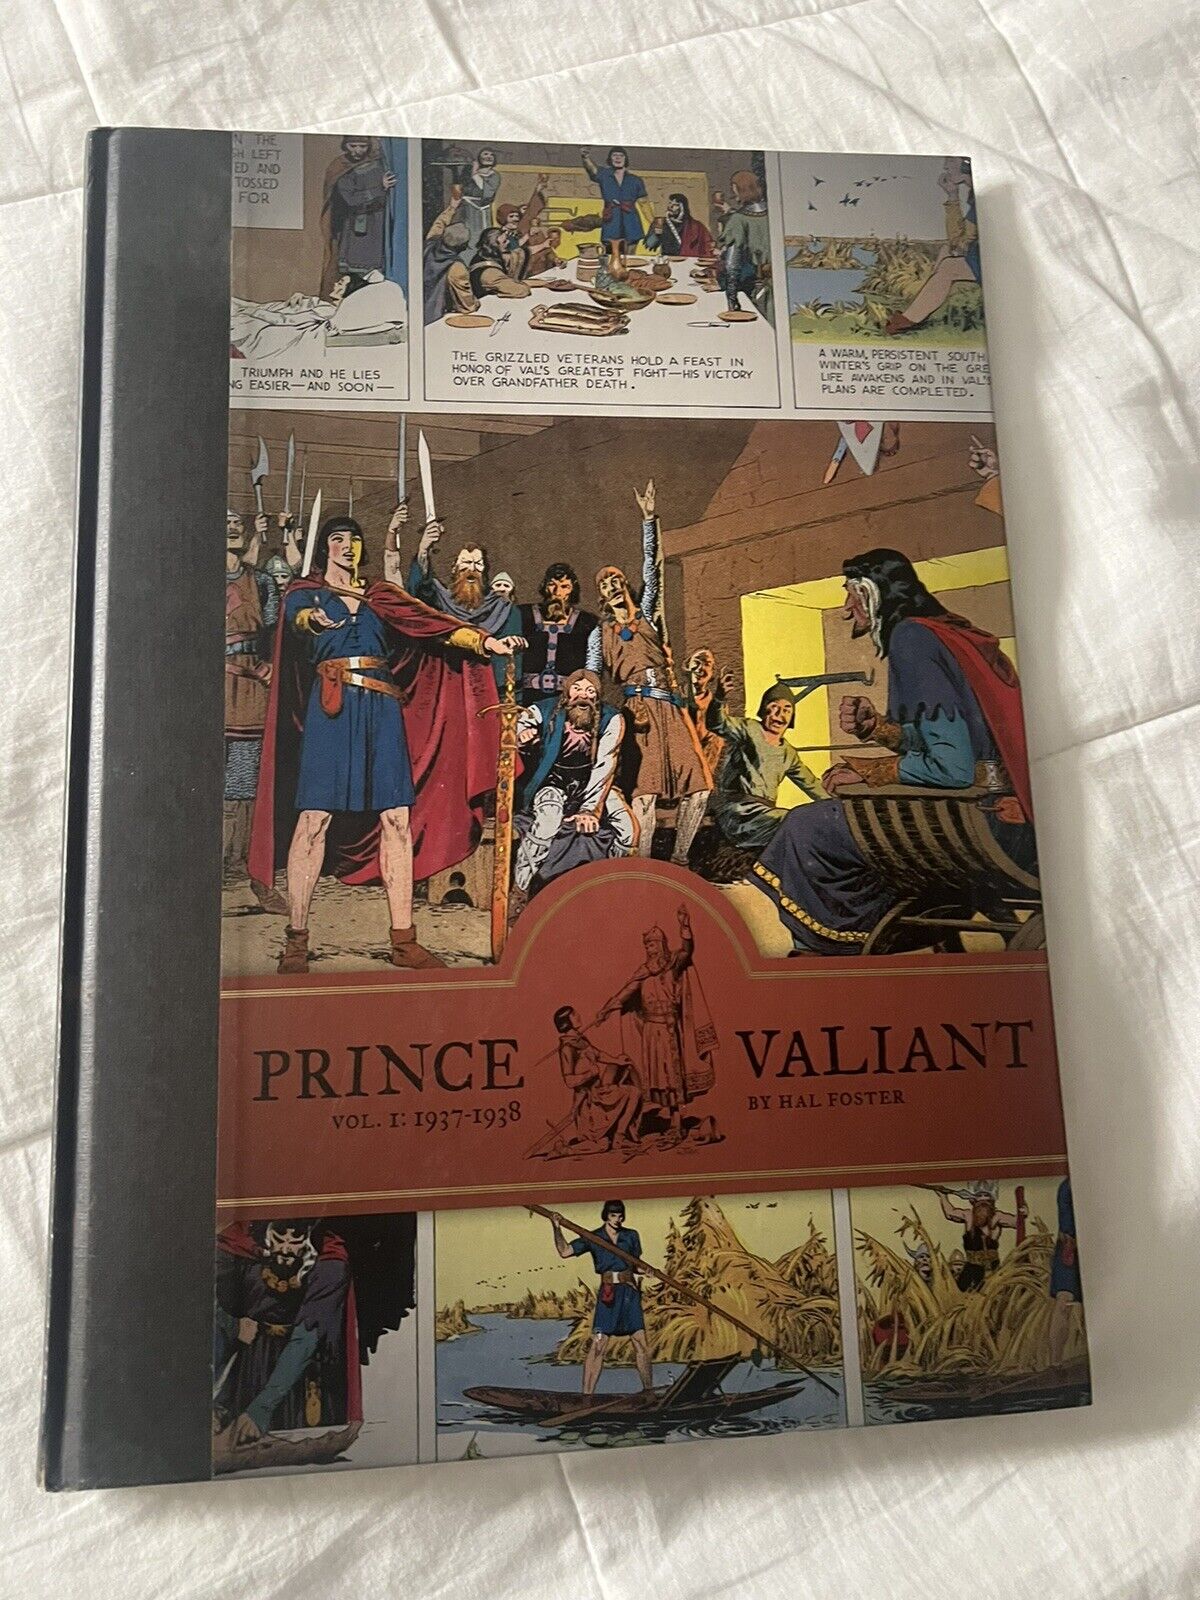 Prince Valiant: Vol 1 1937-1938 by Hal Foster (2009, Hardcover)